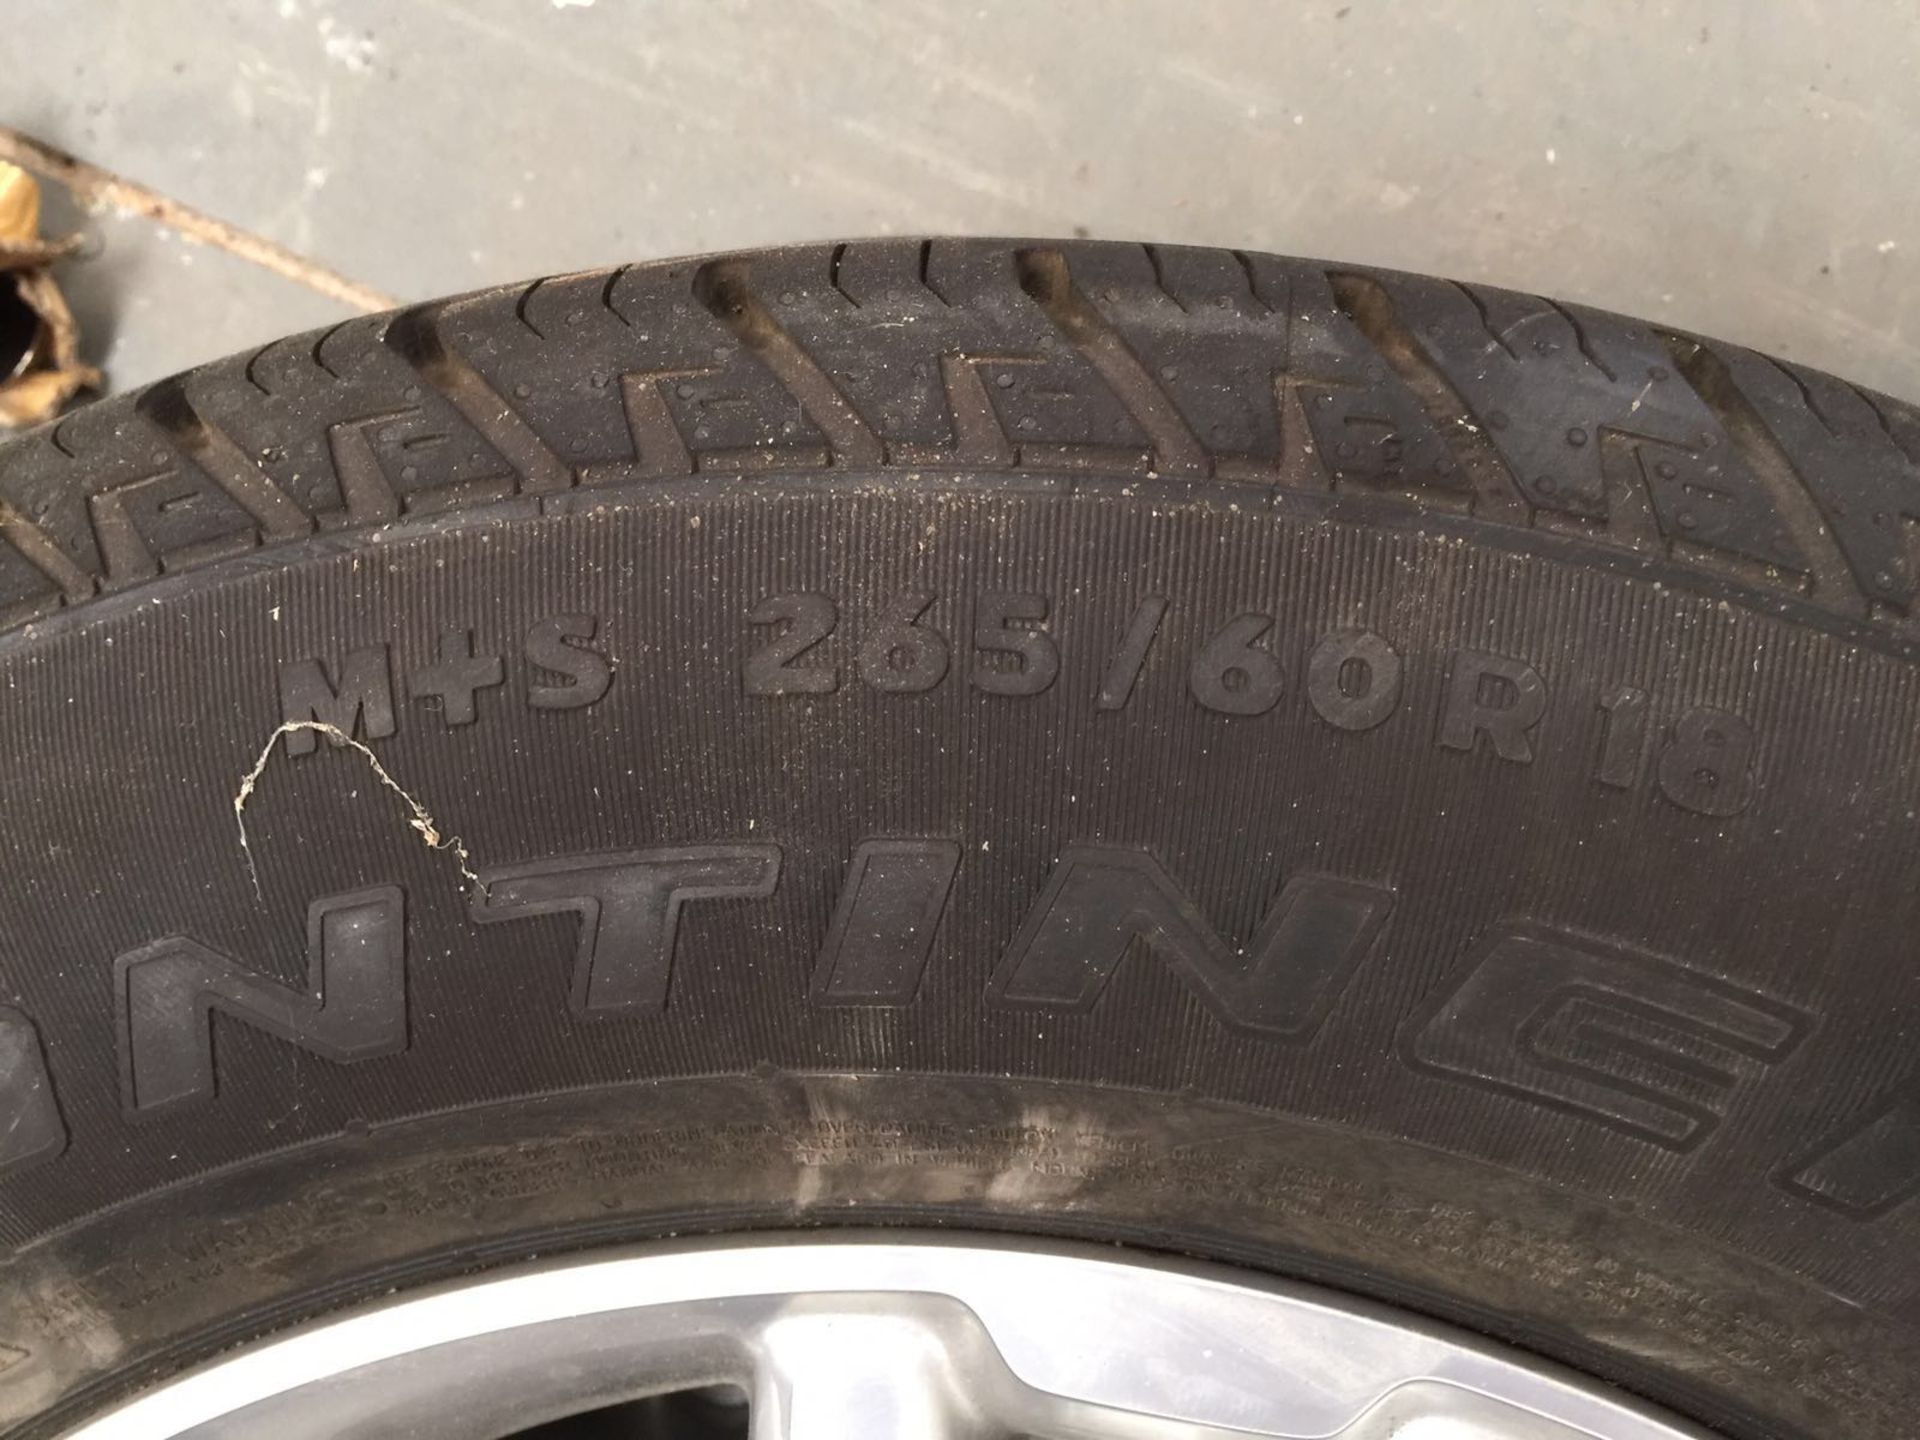 SET OF 4 2016 18" FORD RANGER ALLOY WHEELS WITH CONTINENTAL CROSS CONTACT TYRES ONLY 100 MILES - Image 2 of 5